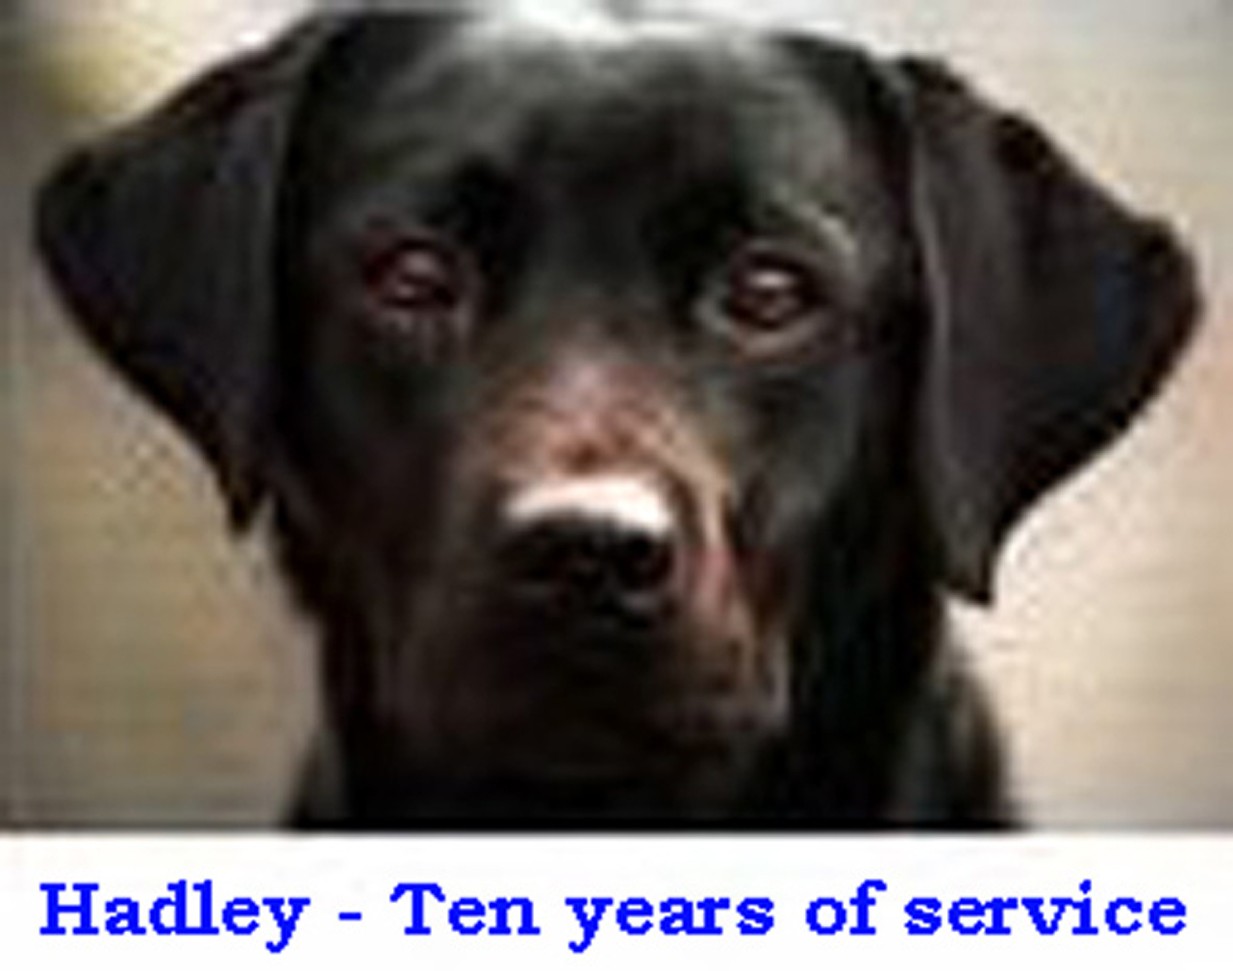 Hadley,; Guiding Eyes for the Blind